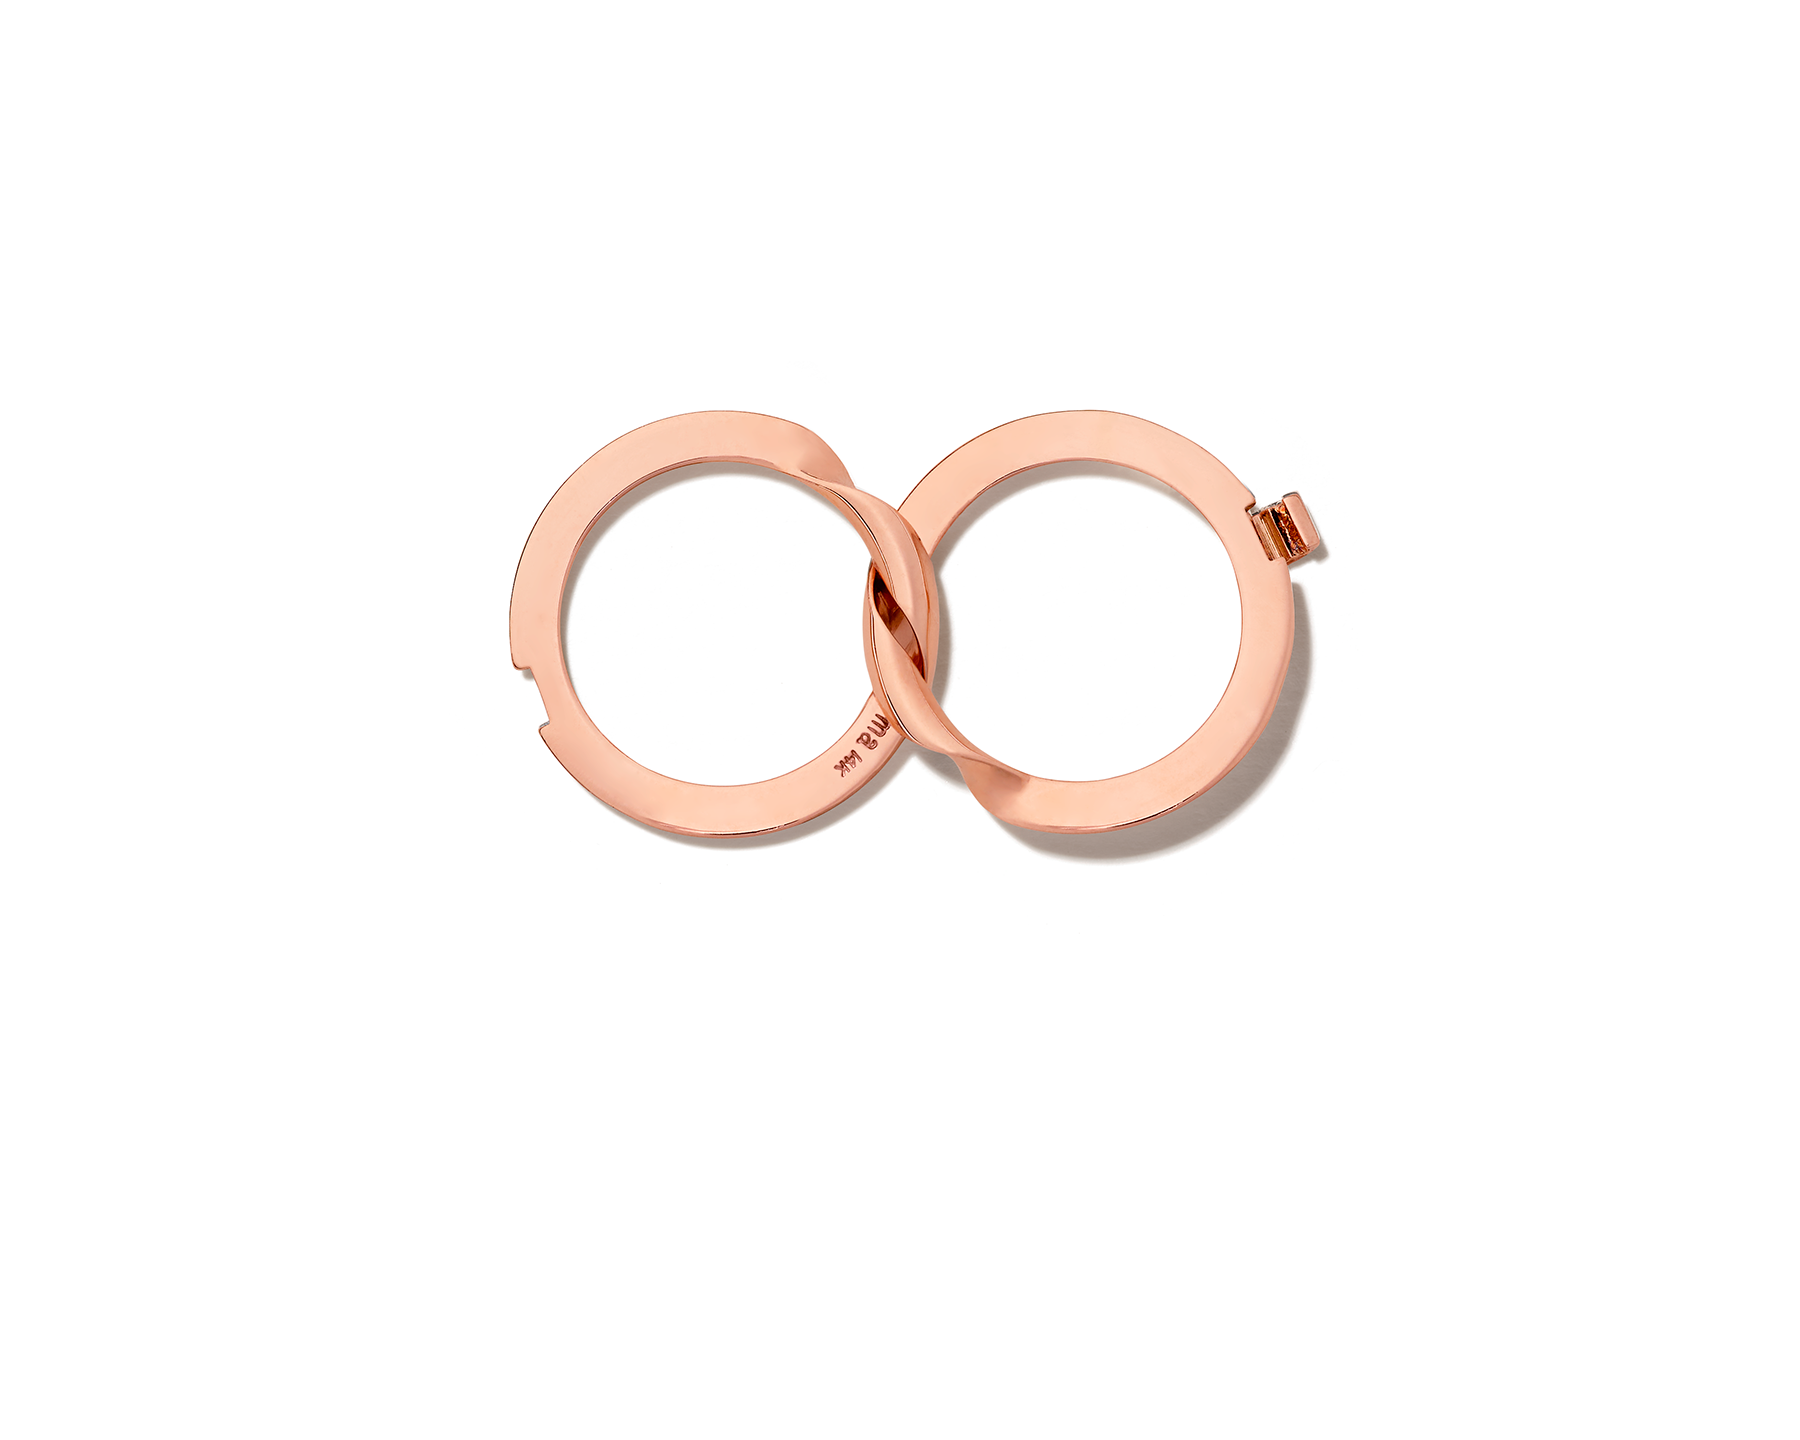 Aerial view of rose gold intertwined rings